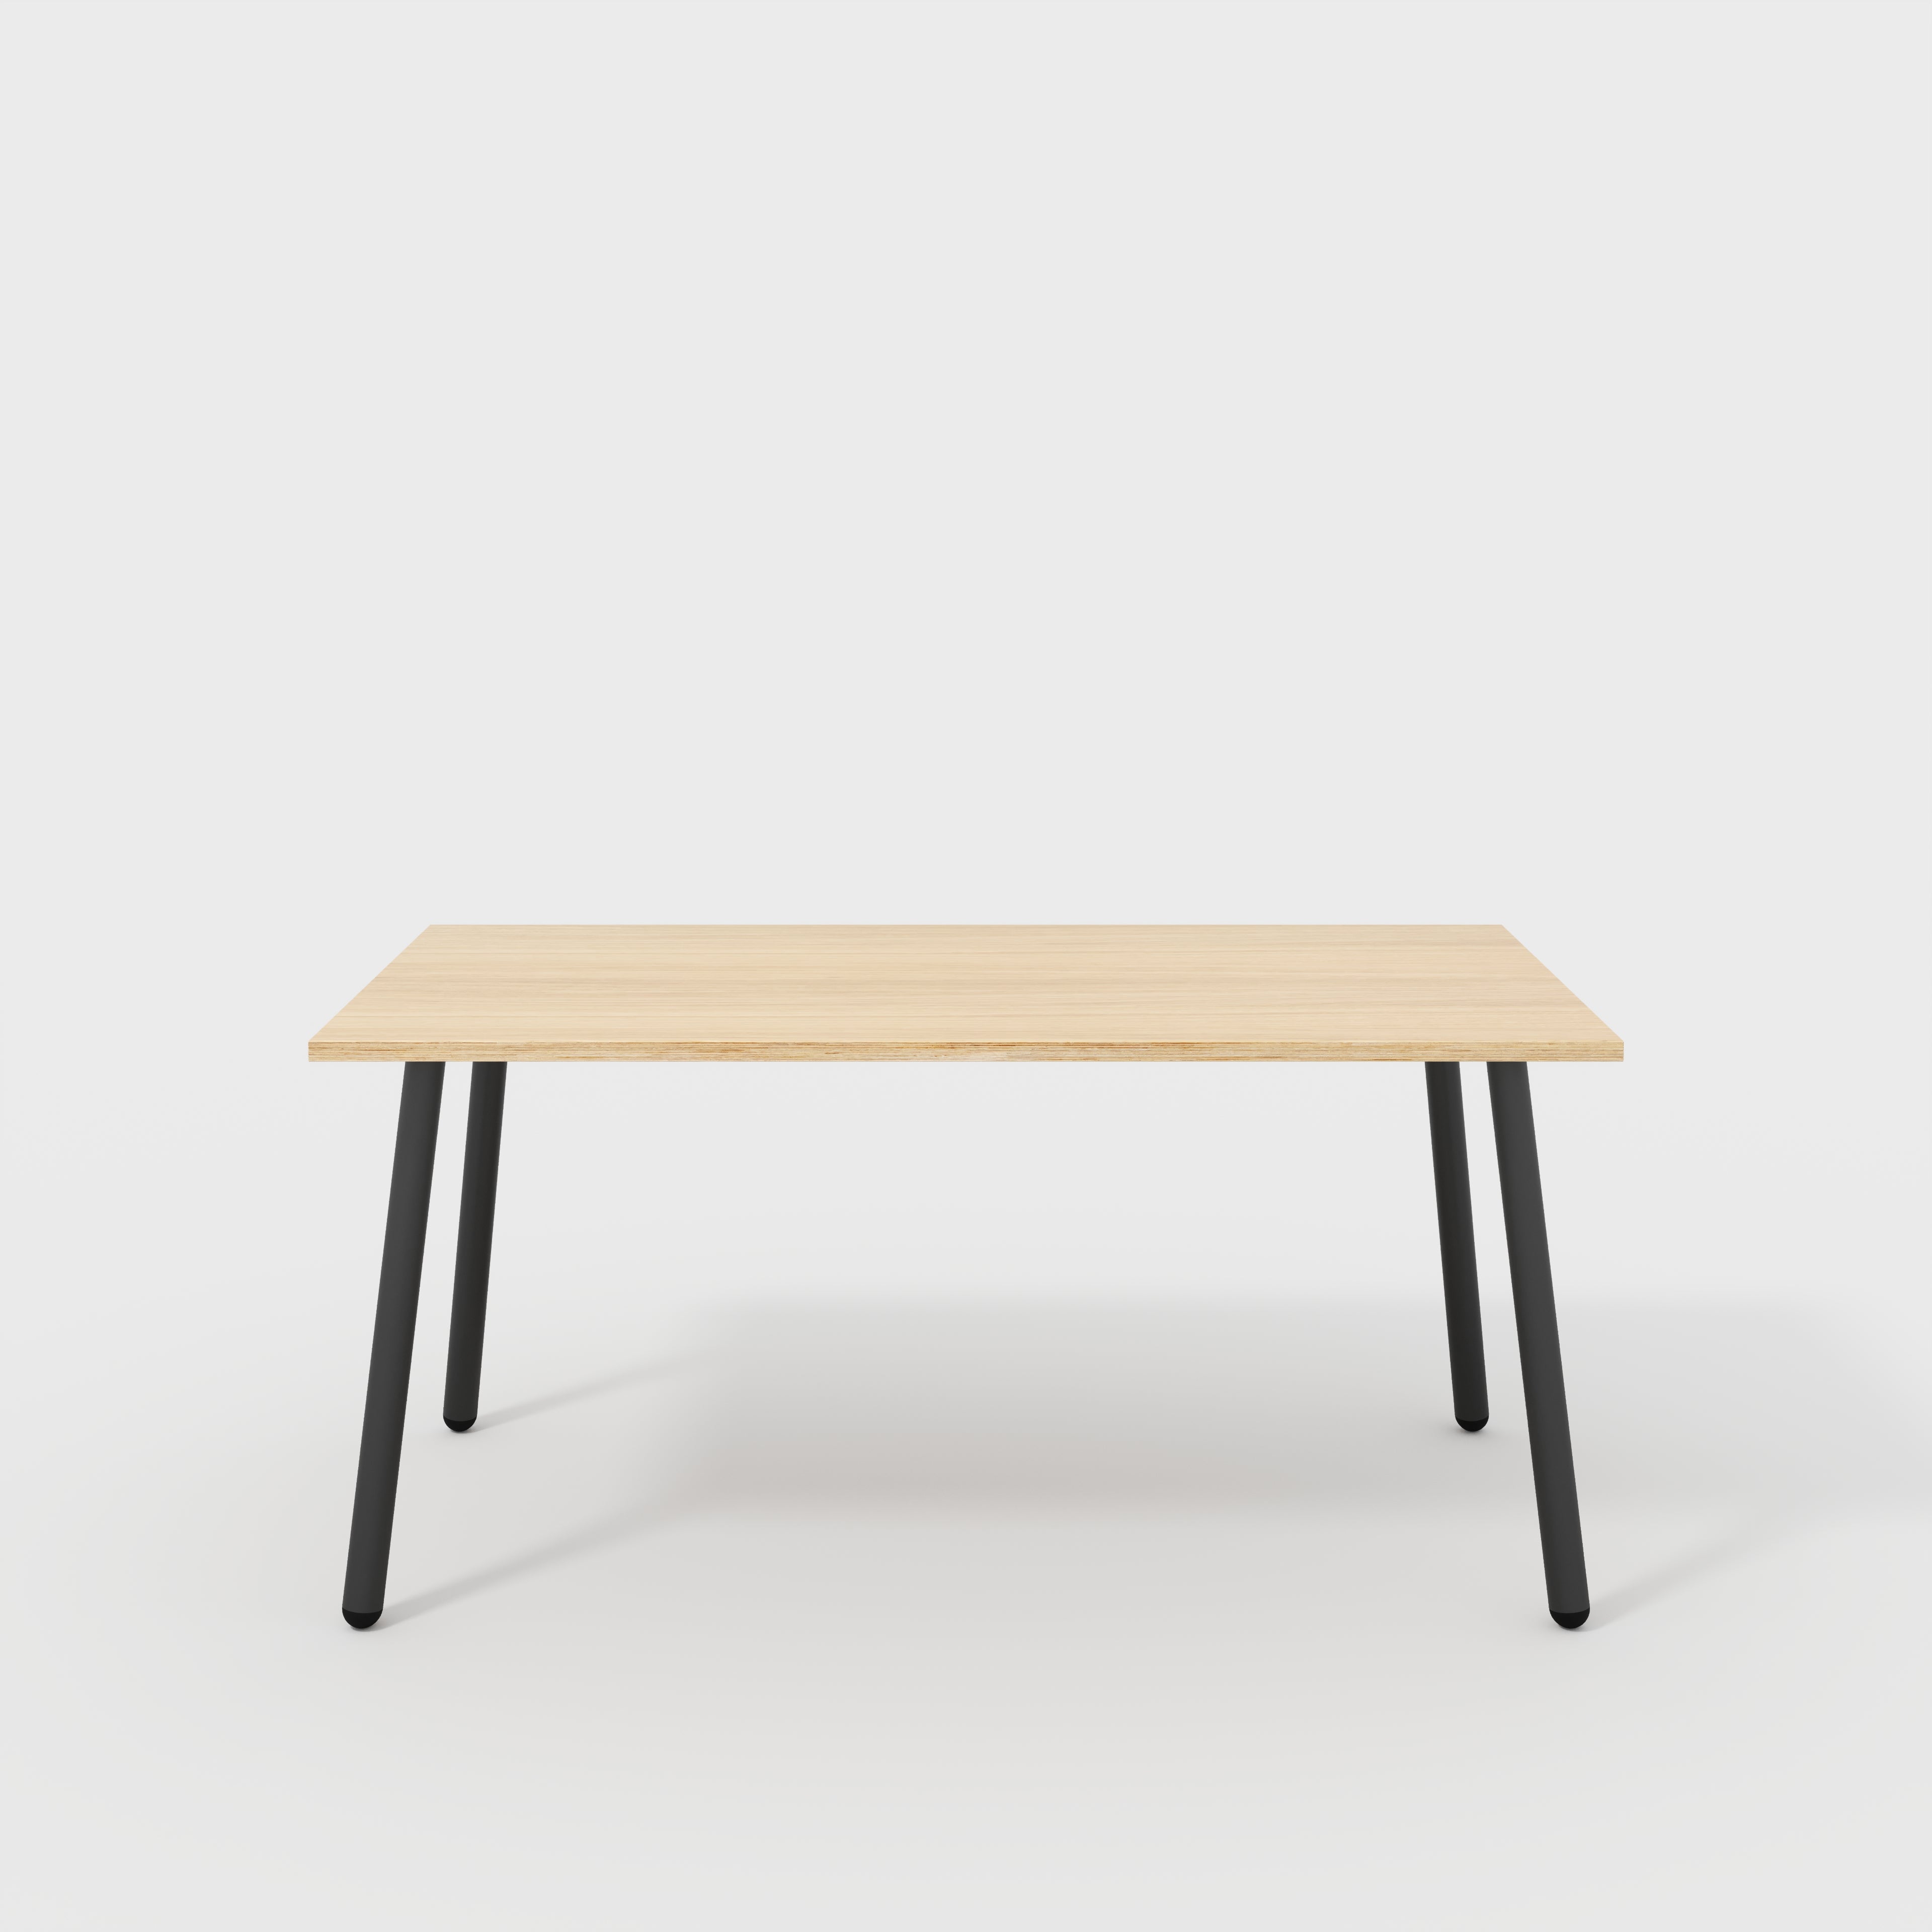 Table with Black Round Single Pin Legs - Plywood Oak - 1600(w) x 800(d) x 735(h)